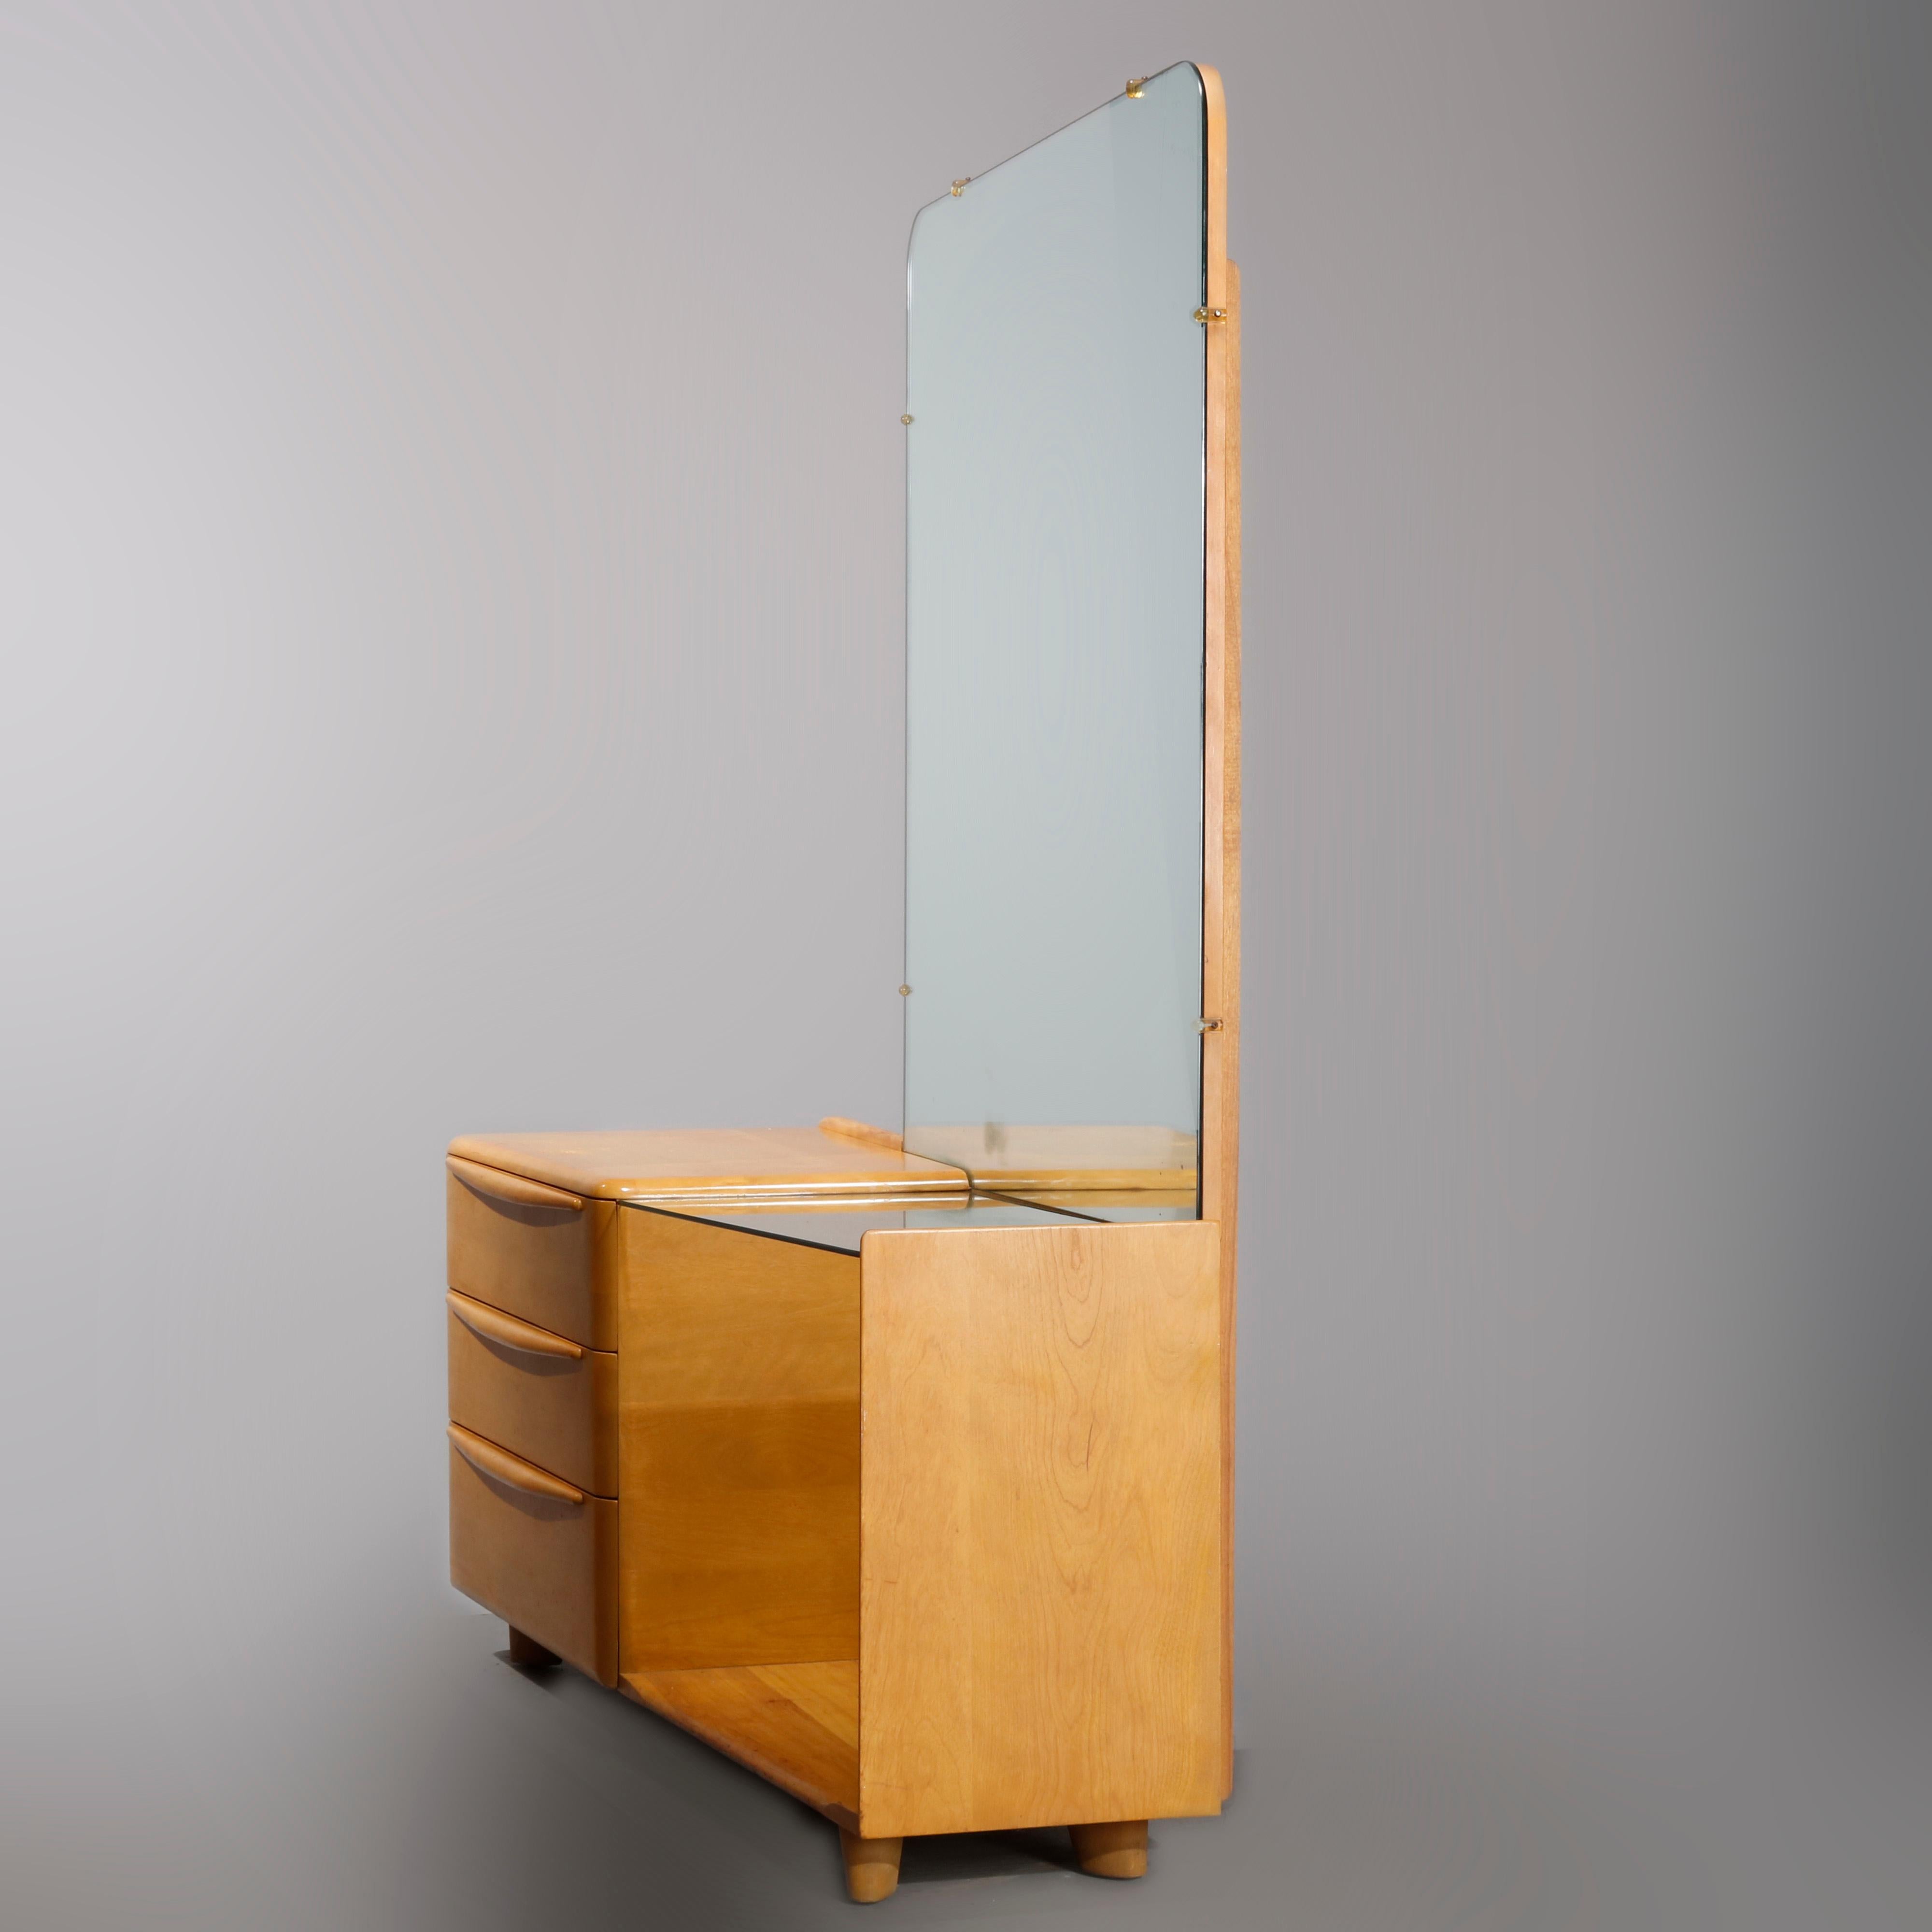 A Mid-Century Modern dressing table by Heywood Wakefield offers birch construction in Encore design with wheat finish offers left drawer tower with full length mirror and glass top dressing table on right, labeled in drawer as photographed,